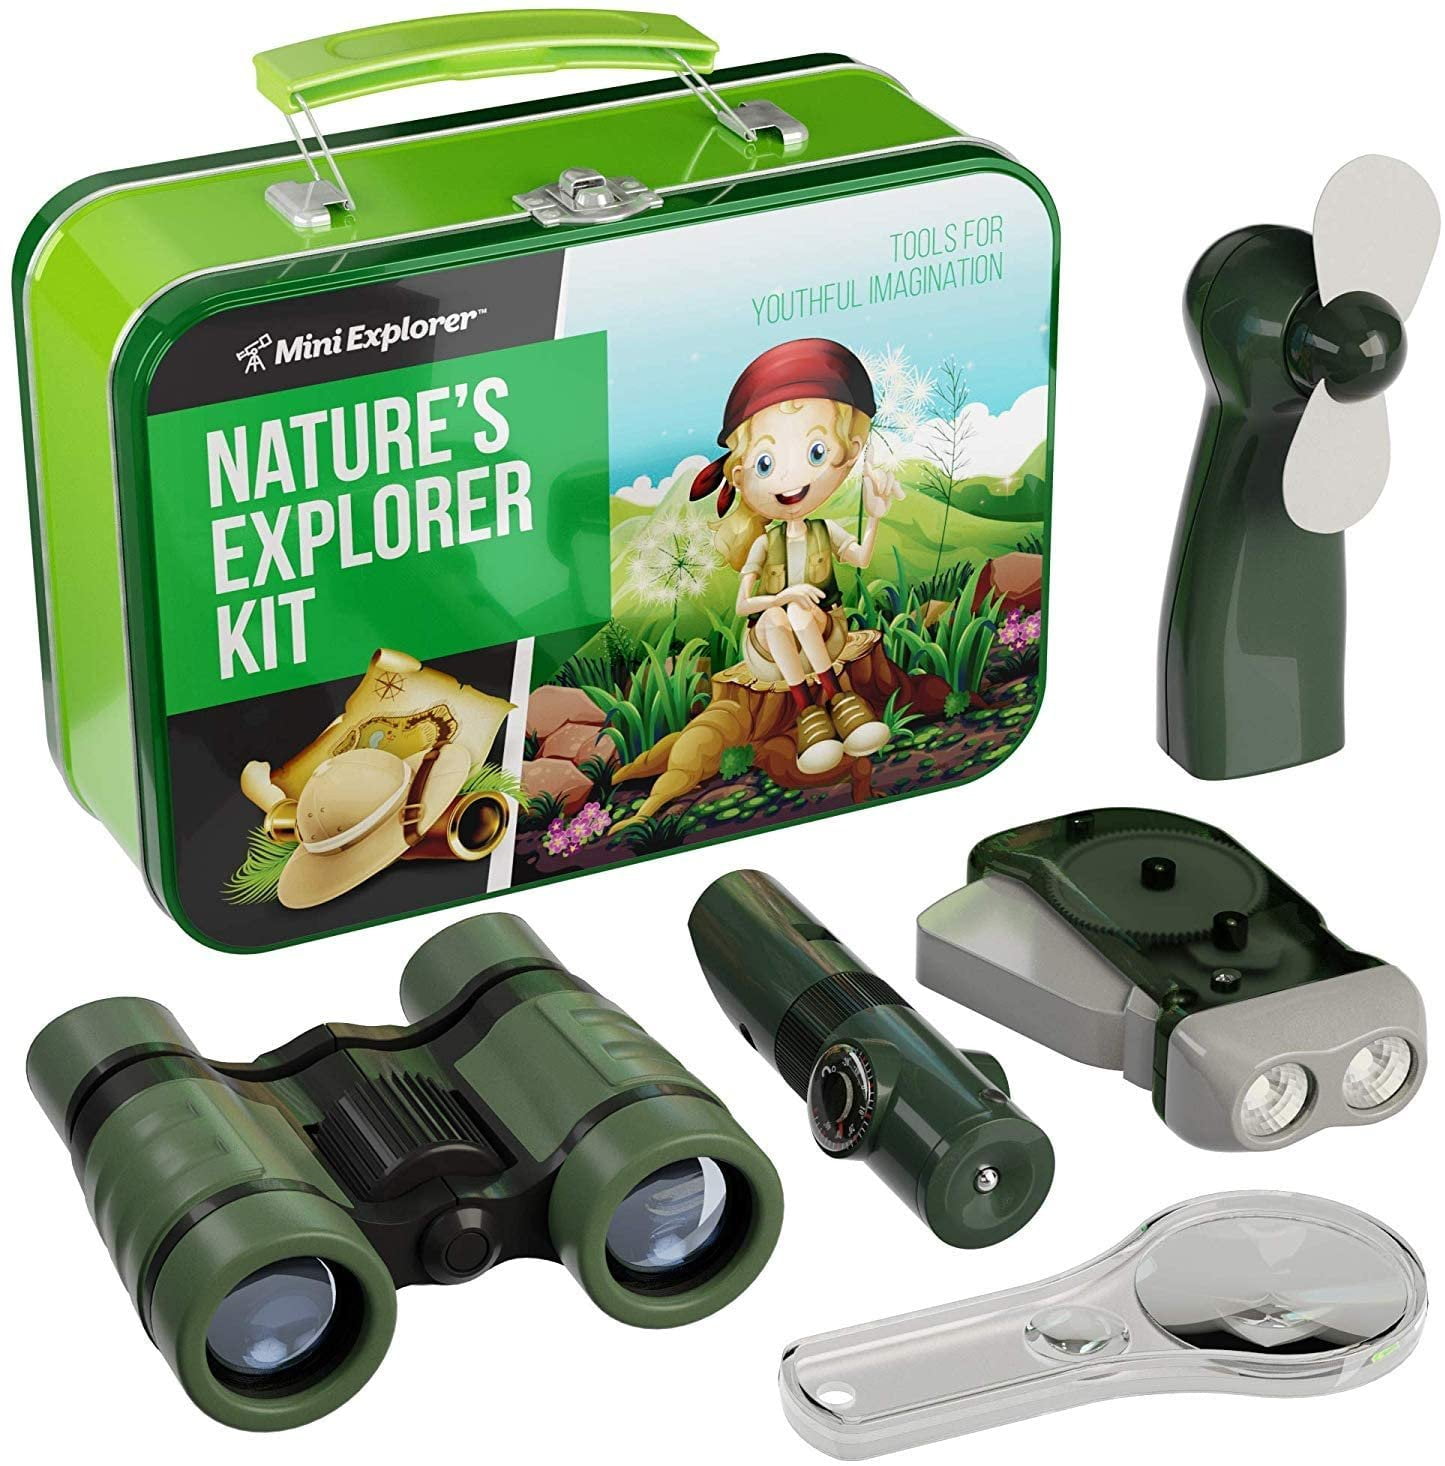 Proster Kids Adventure Kit Childrens Toys Binoculars Flashlight Luminous Compass Magnifying Glass for Playing Outside Camping Bird Watching or a Gift for Children 